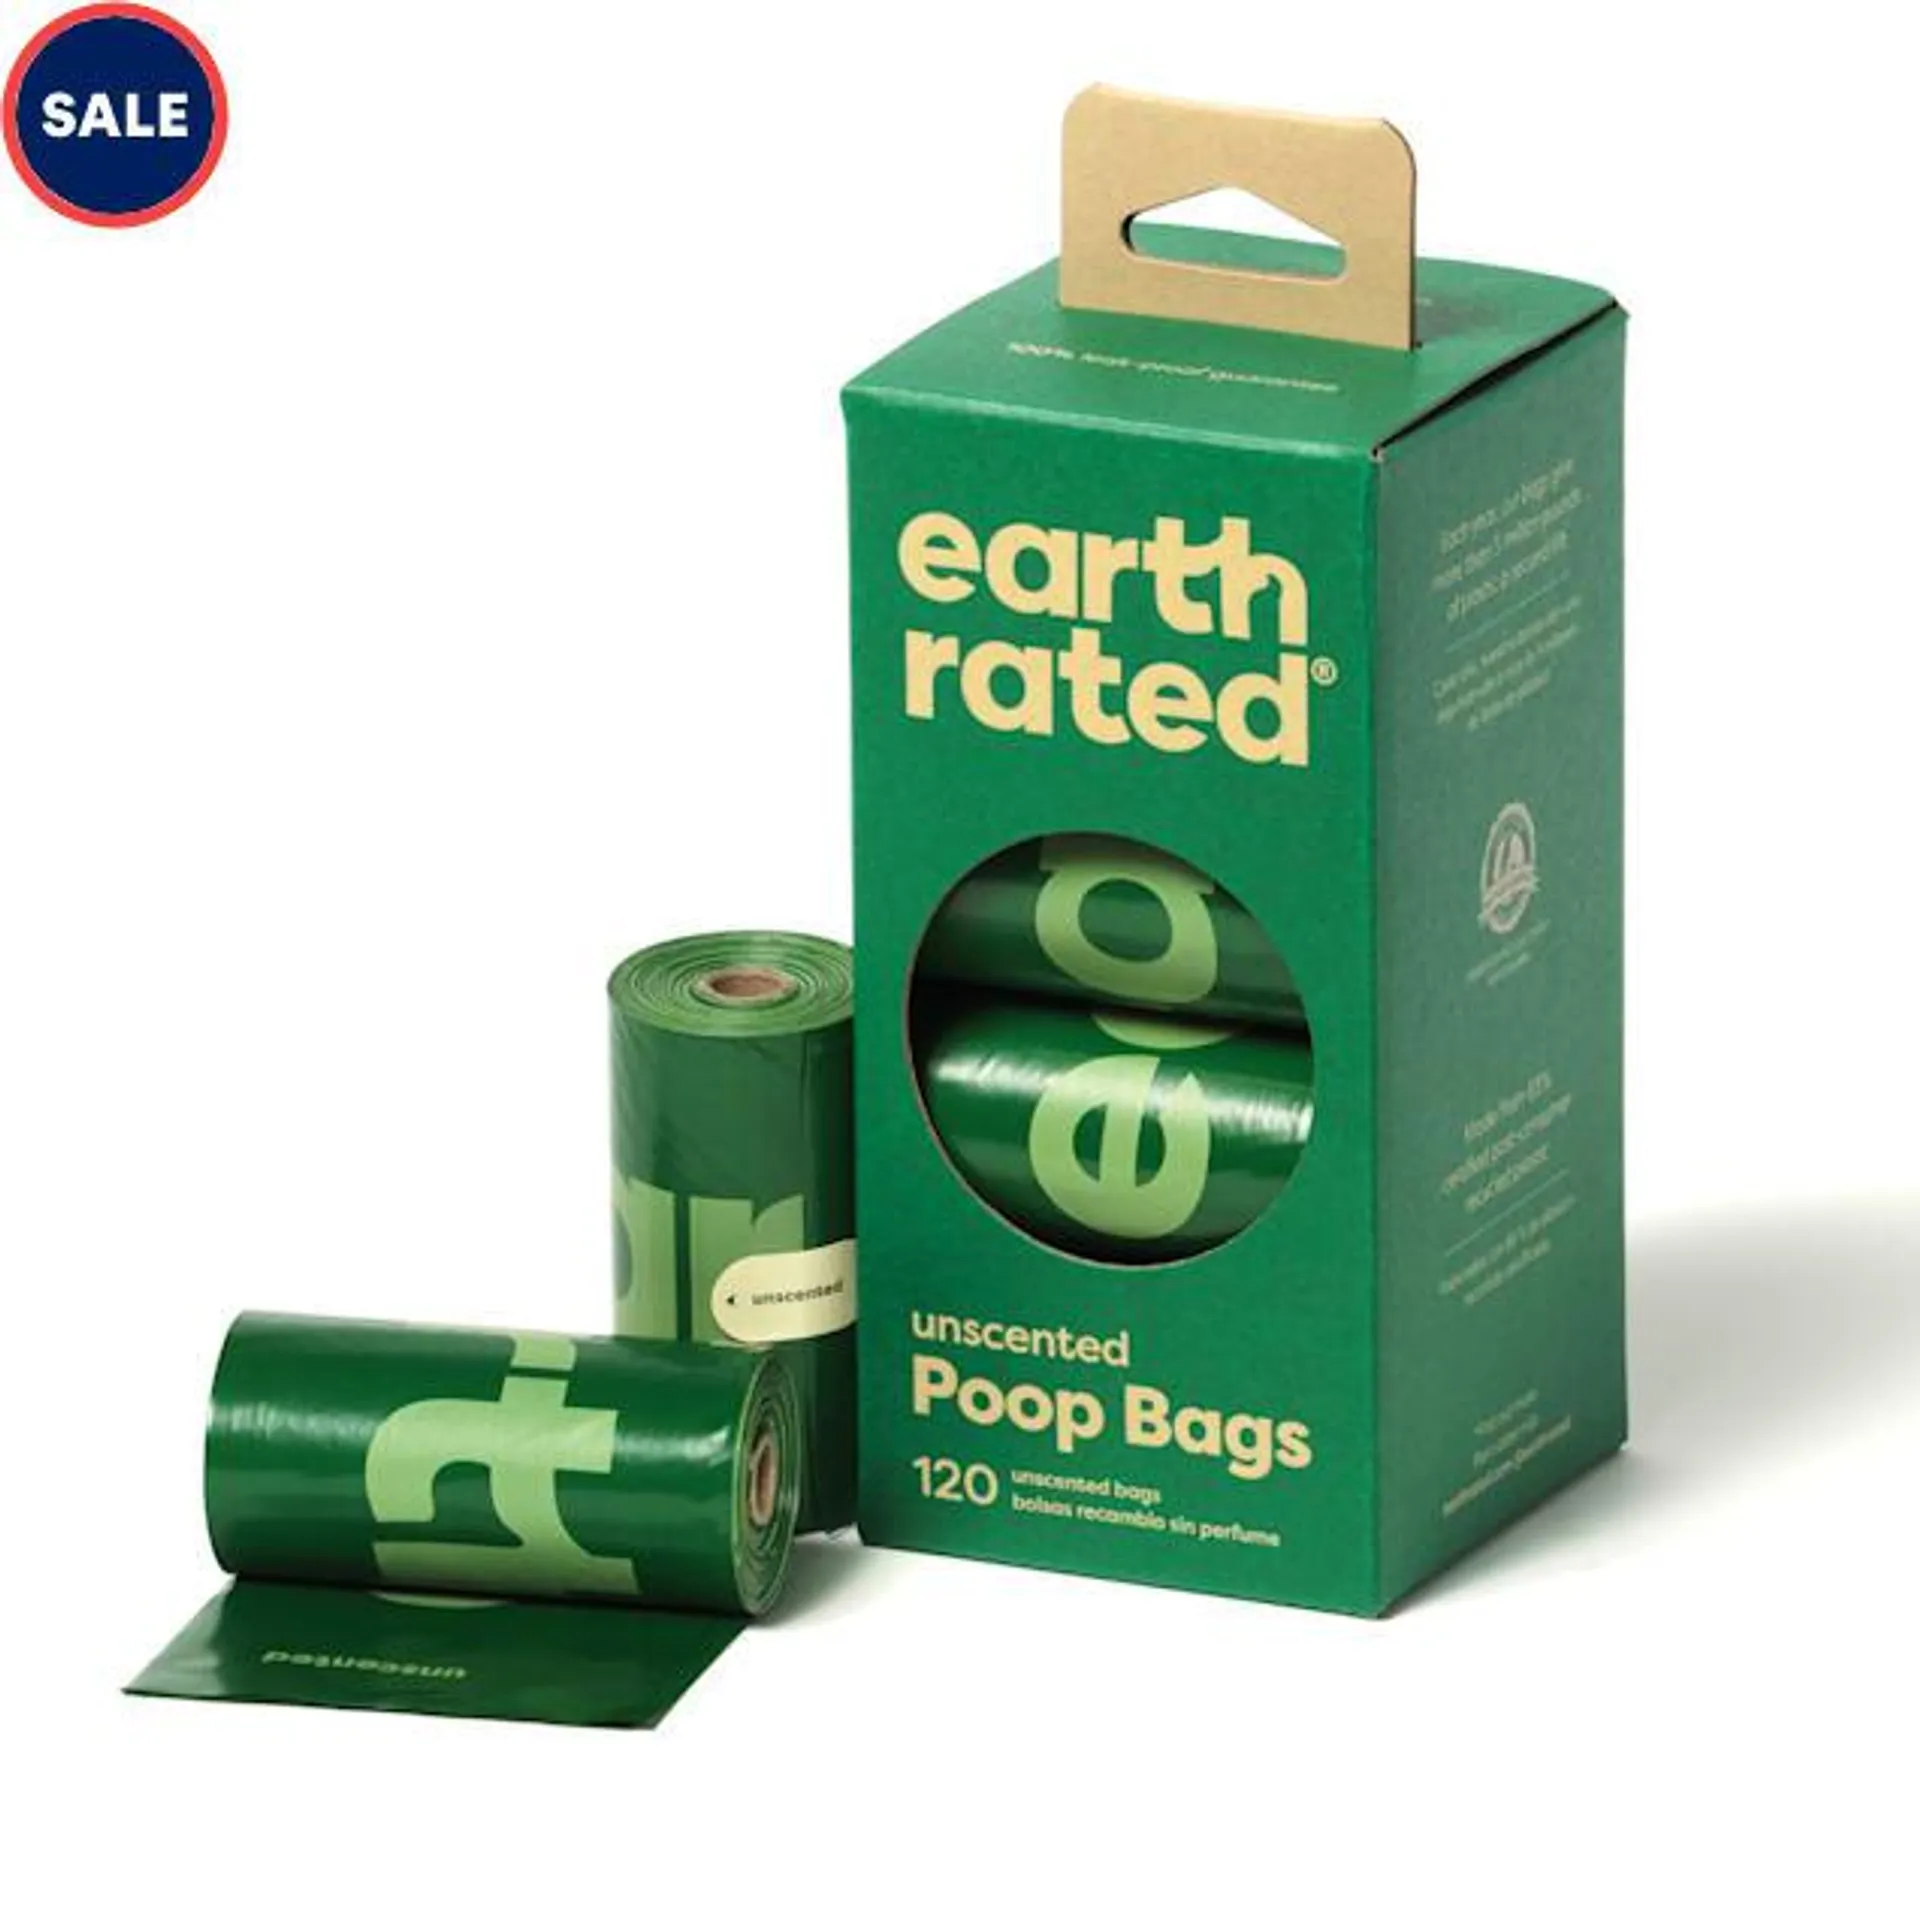 Earth Rated Dog Poop Bags Unscented Refill Rolls, Count of 120